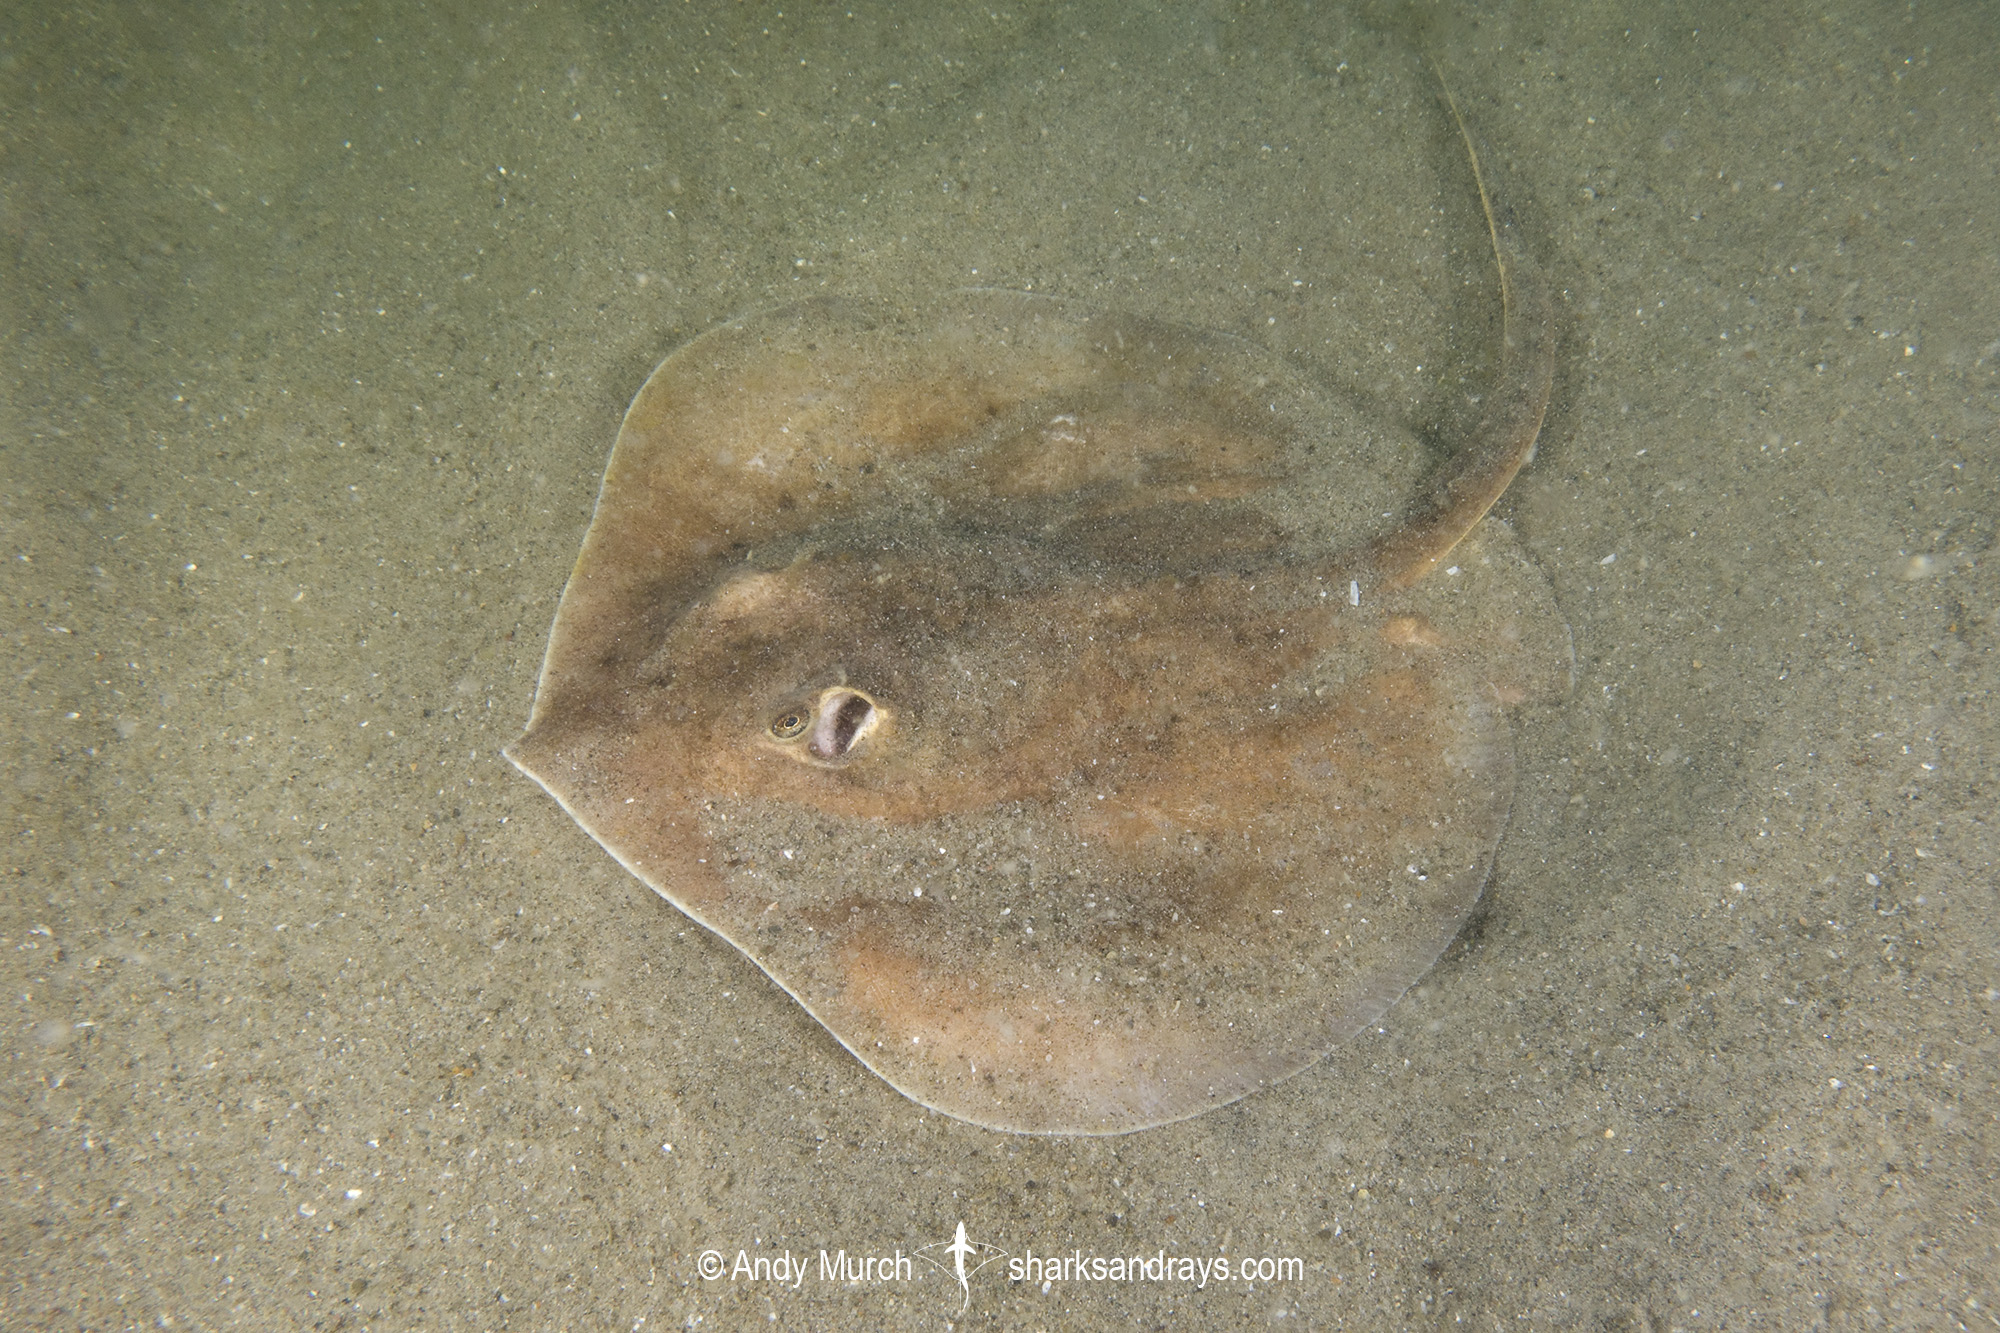 Rogers' Round Ray